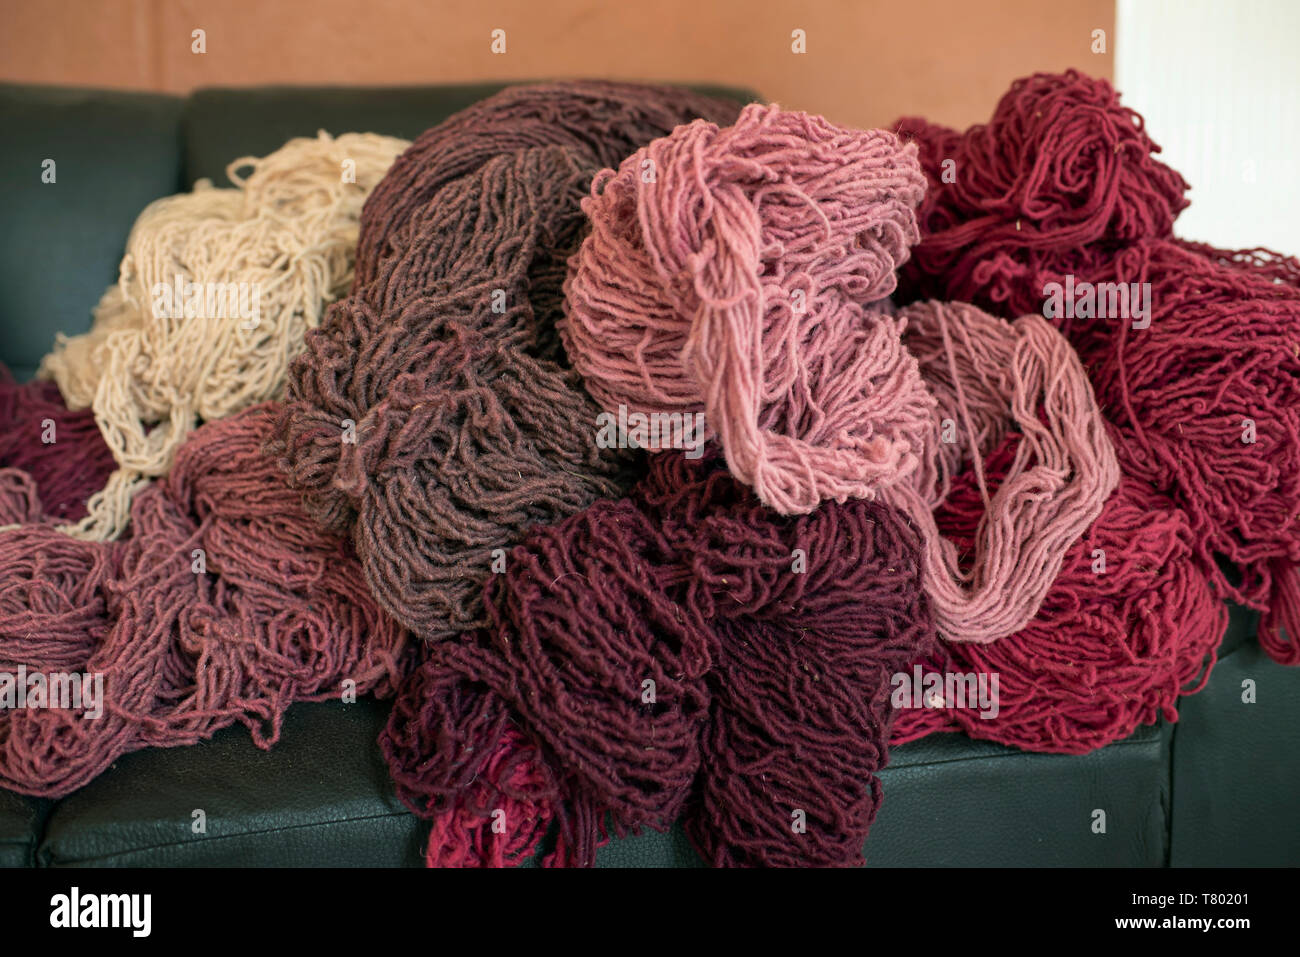 Woolen yarns ready to be woven. Different tones of natural red dye obtained from the cochineal insect. Teotitlán del Valle, Oaxaca, Mexico. Apr 2019 Stock Photo